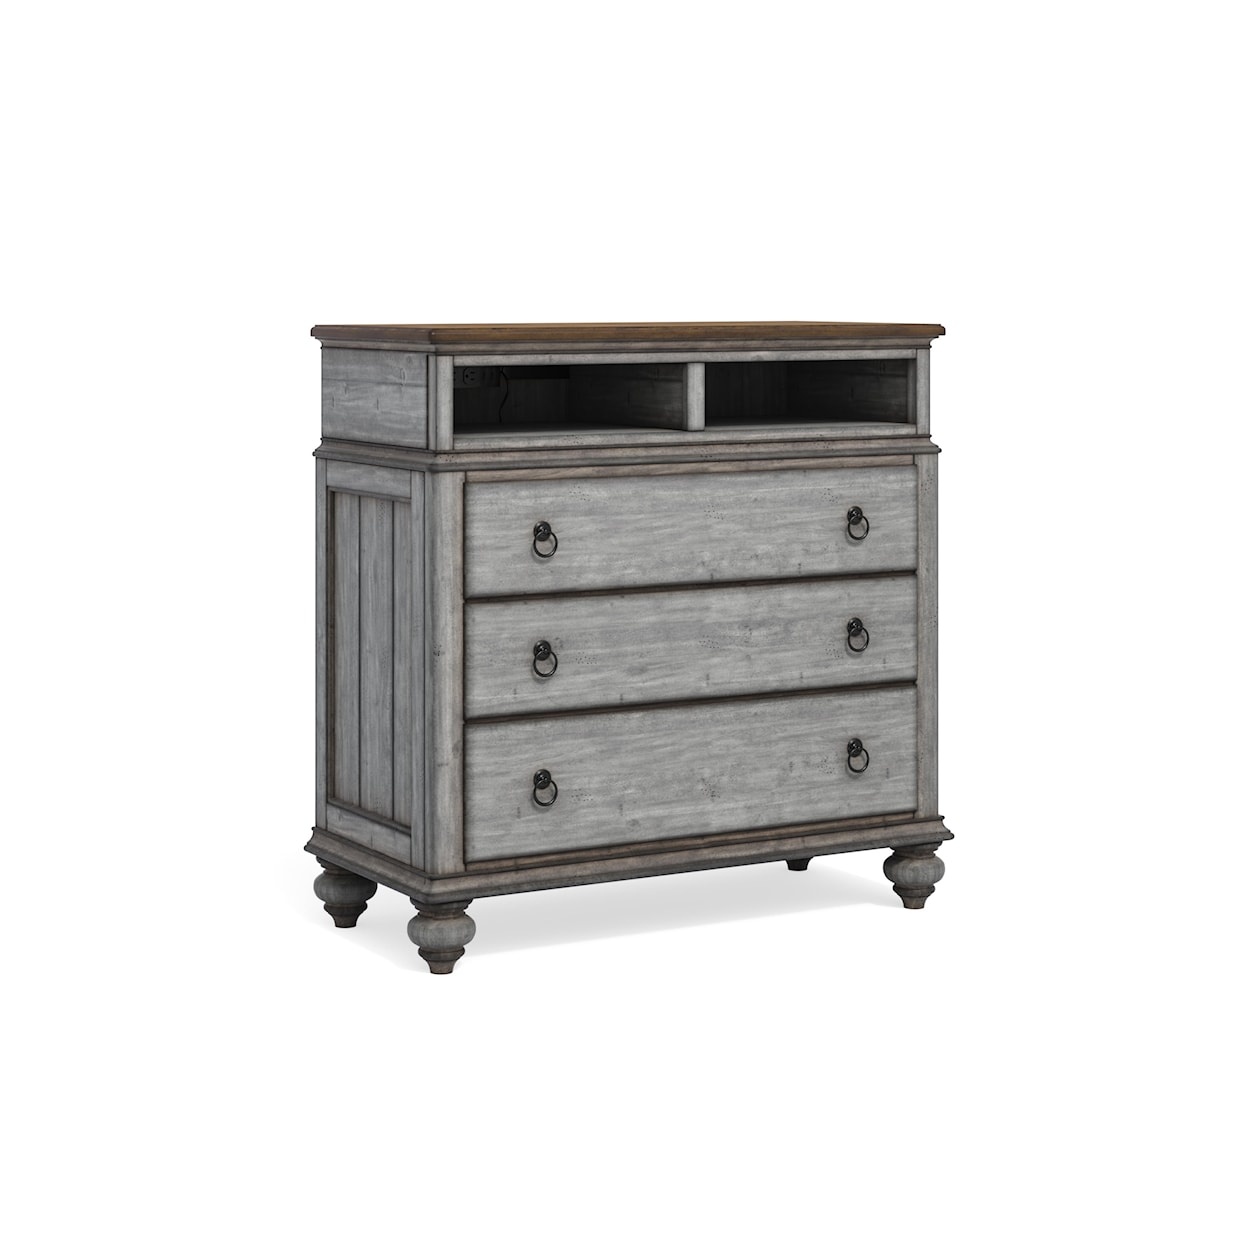 Flexsteel Wynwood Collection Plymouth Media Chest